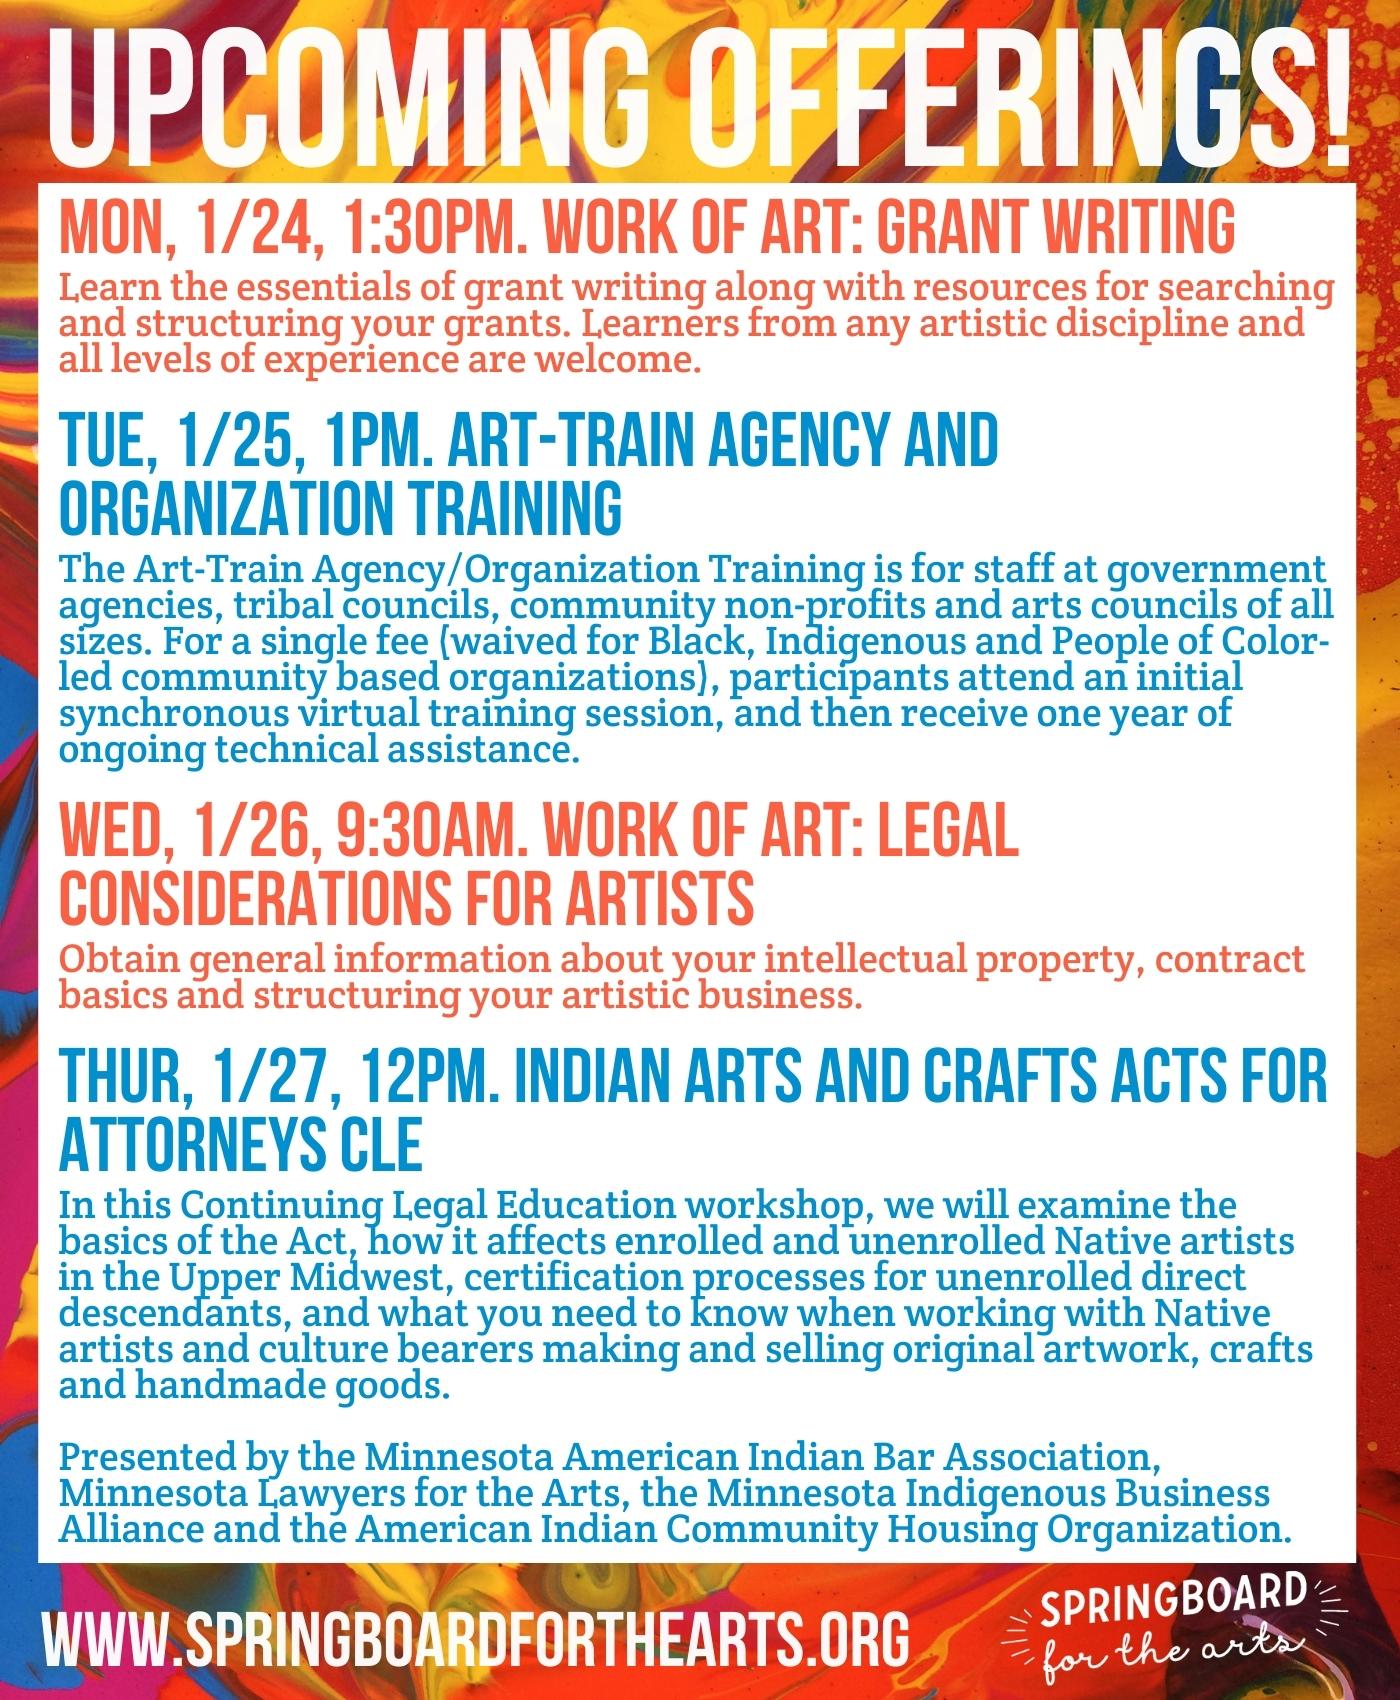 Upcoming Offerings, Springboard for the Arts